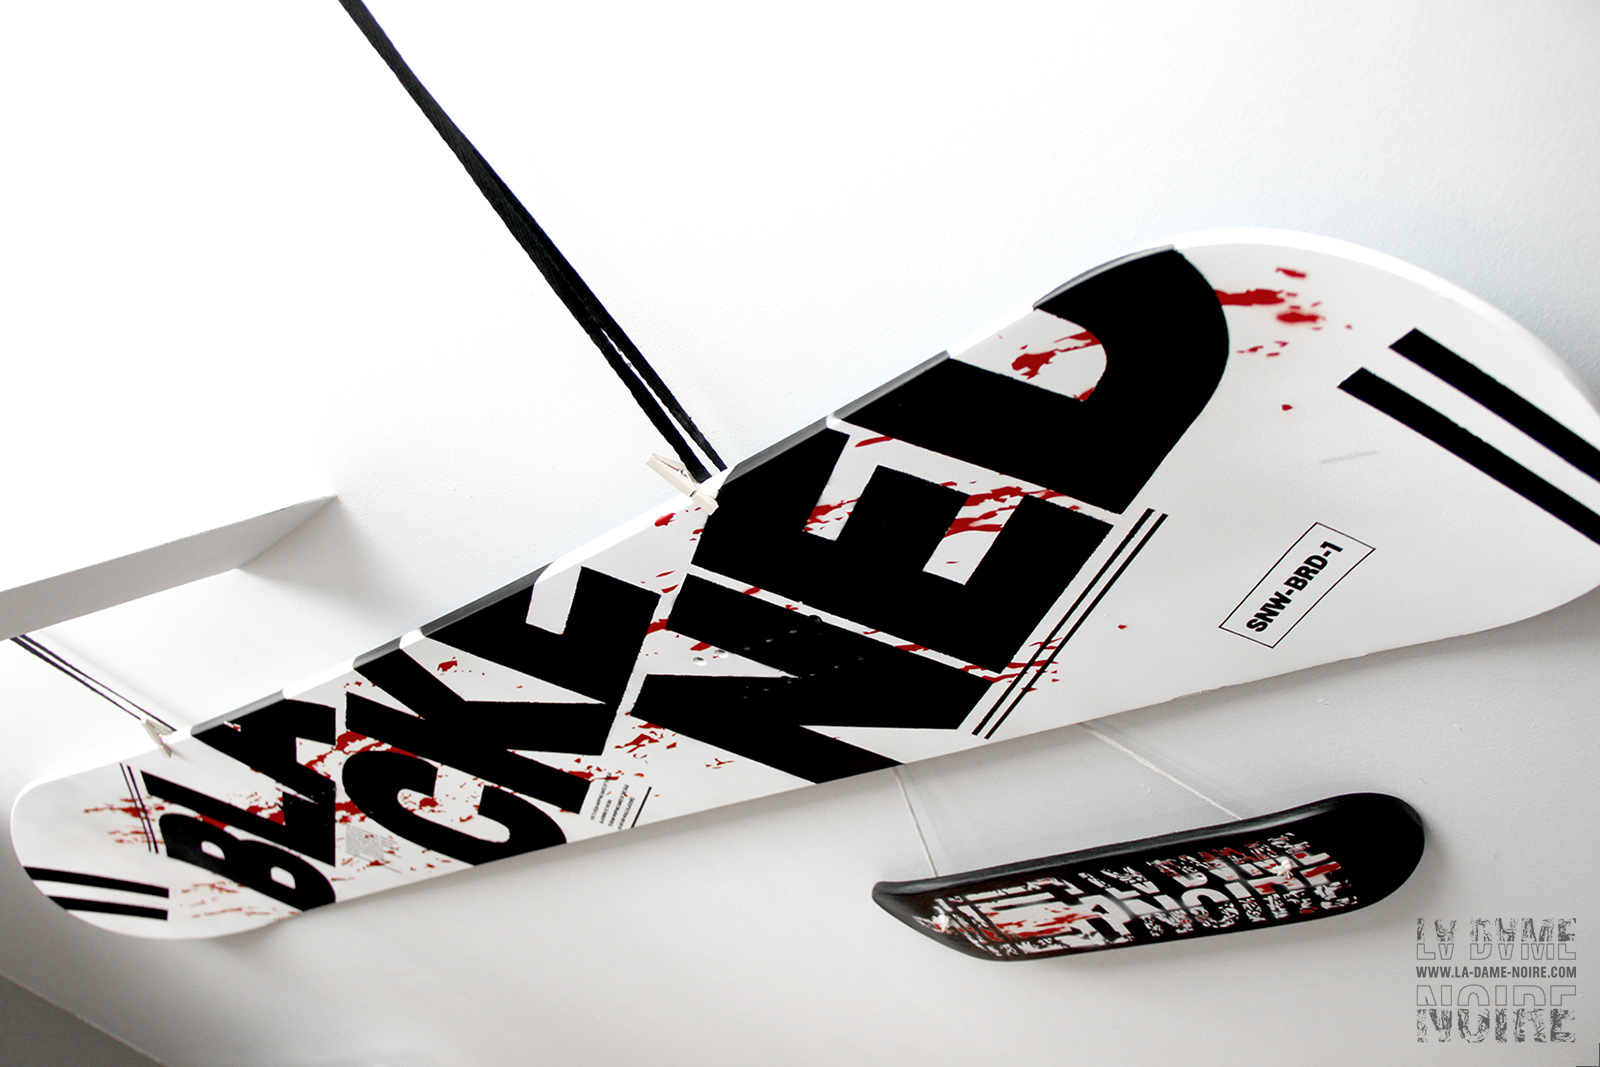 Details of the snowboard painted in black, white, red, and the word Blackened in big bold letters